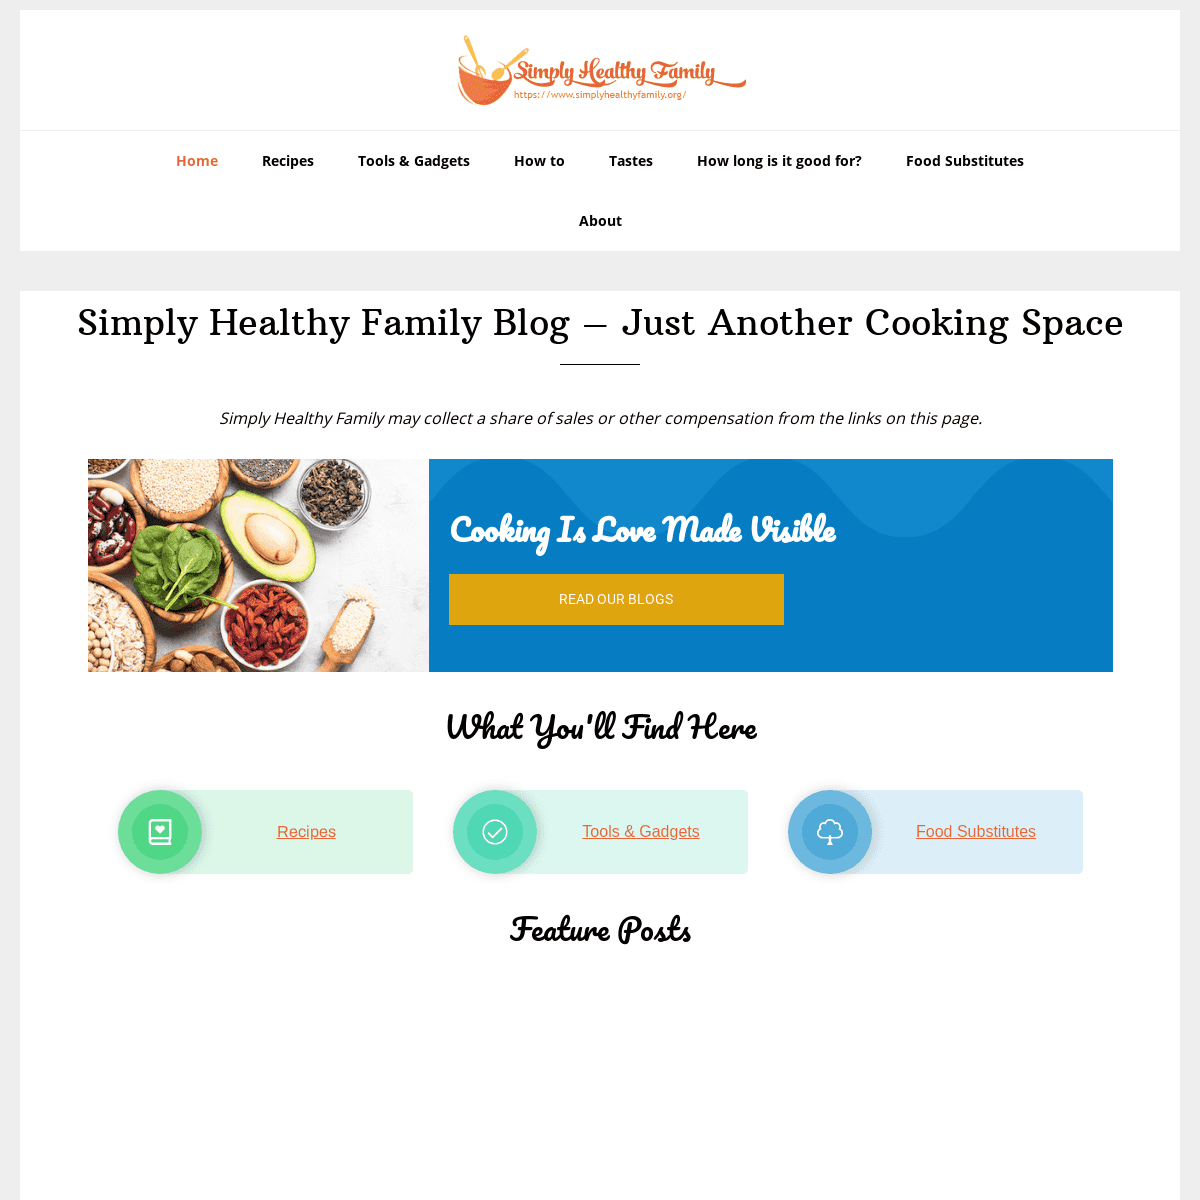 A complete backup of https://simplyhealthyfamily.org